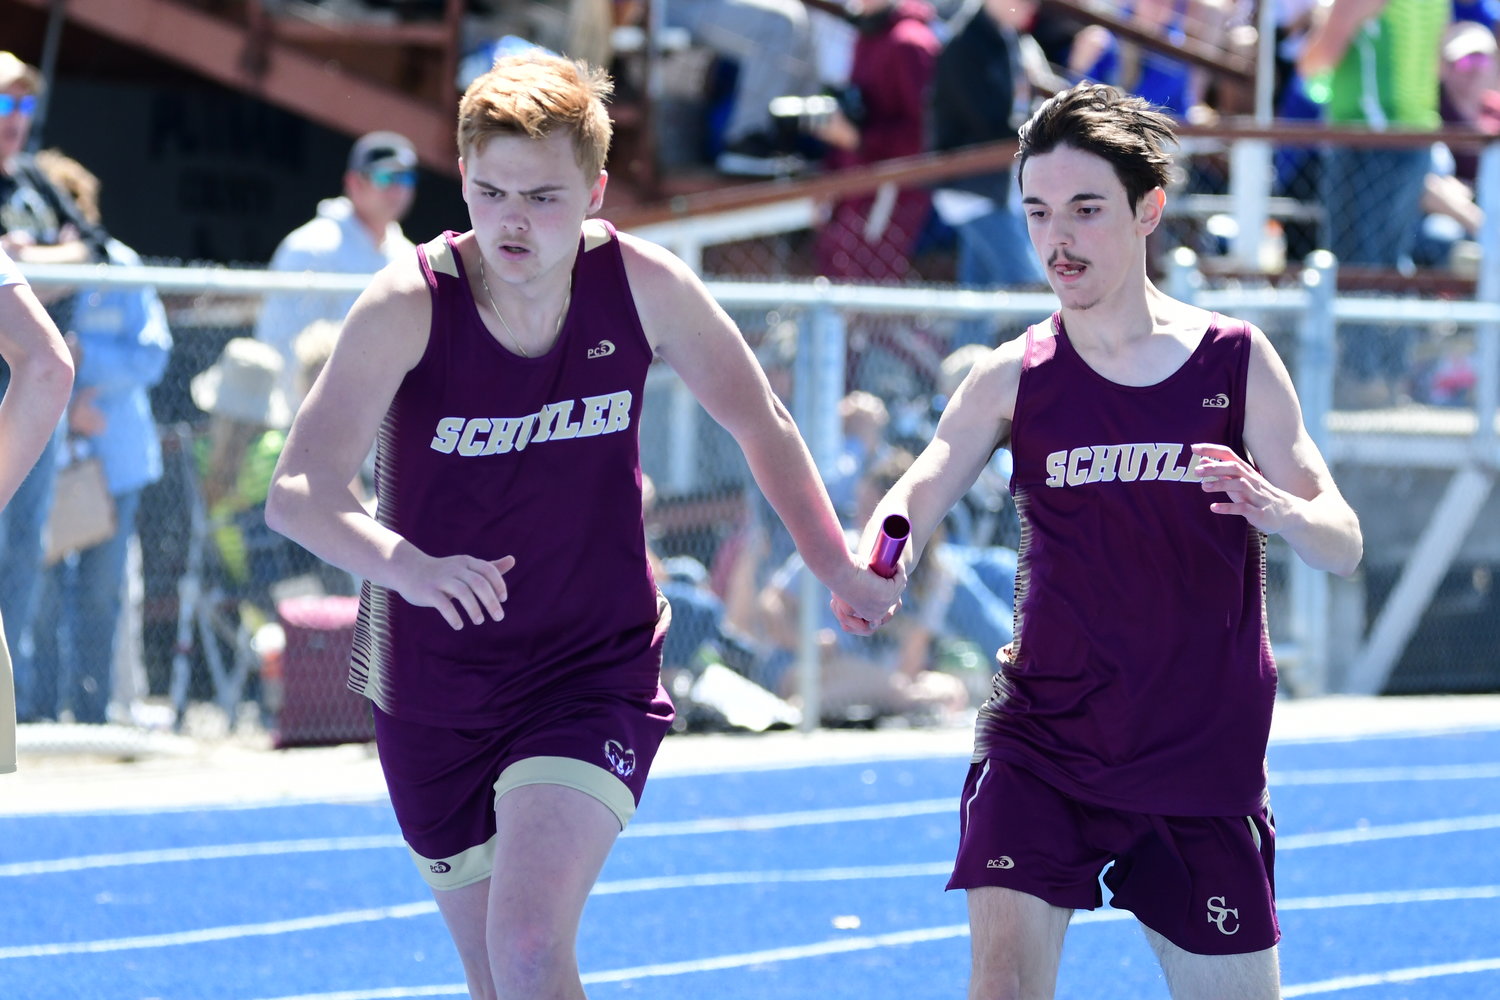 Photos from the Class 2 District 3 track meet, held May 7, 2022, at Putnam County High School.